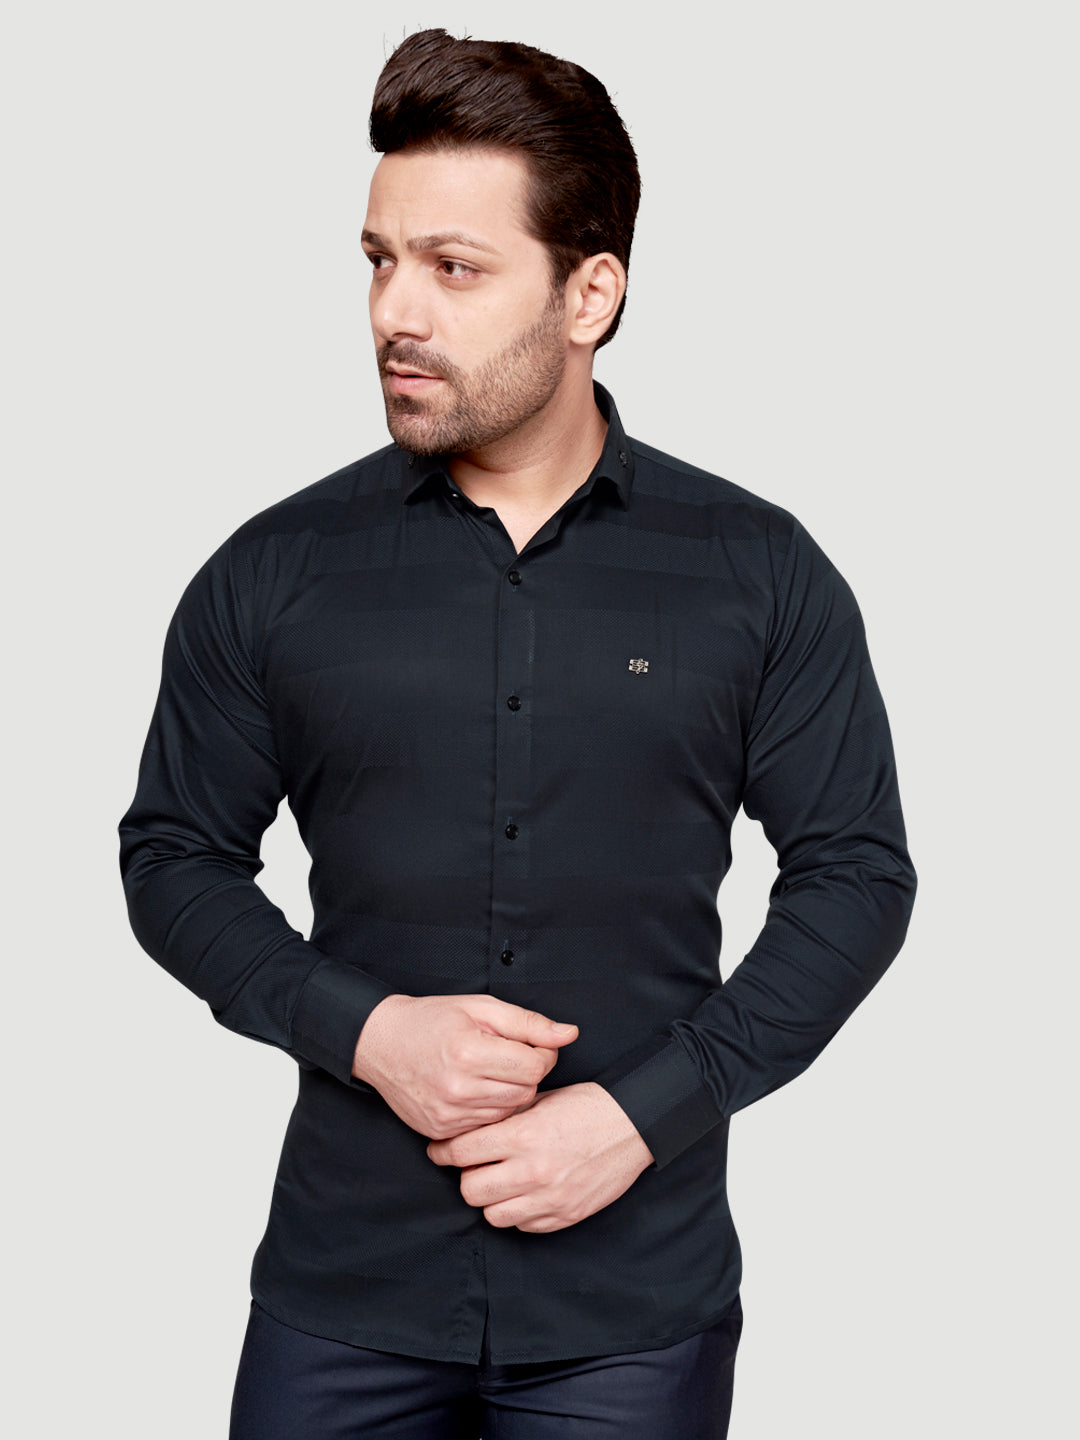 Black and White Men's Designer Shirt with Collar Accessory & Broach Black